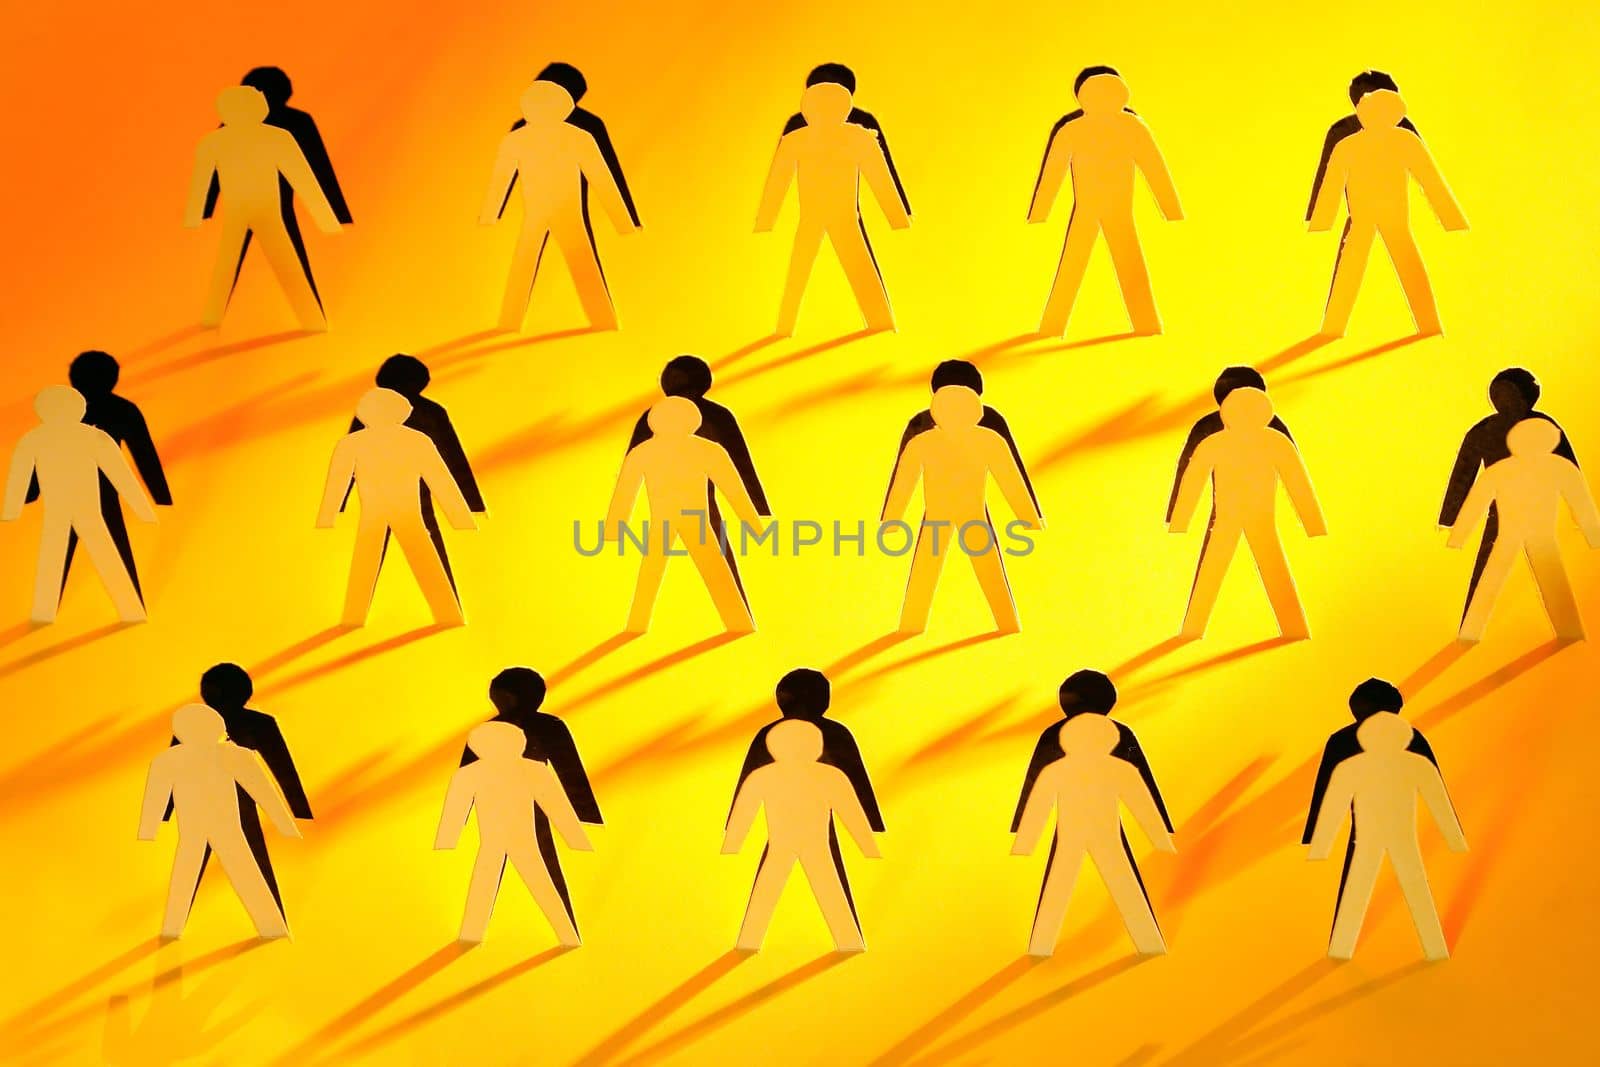 Lot of men figures cutting from yellow paper with long shadow